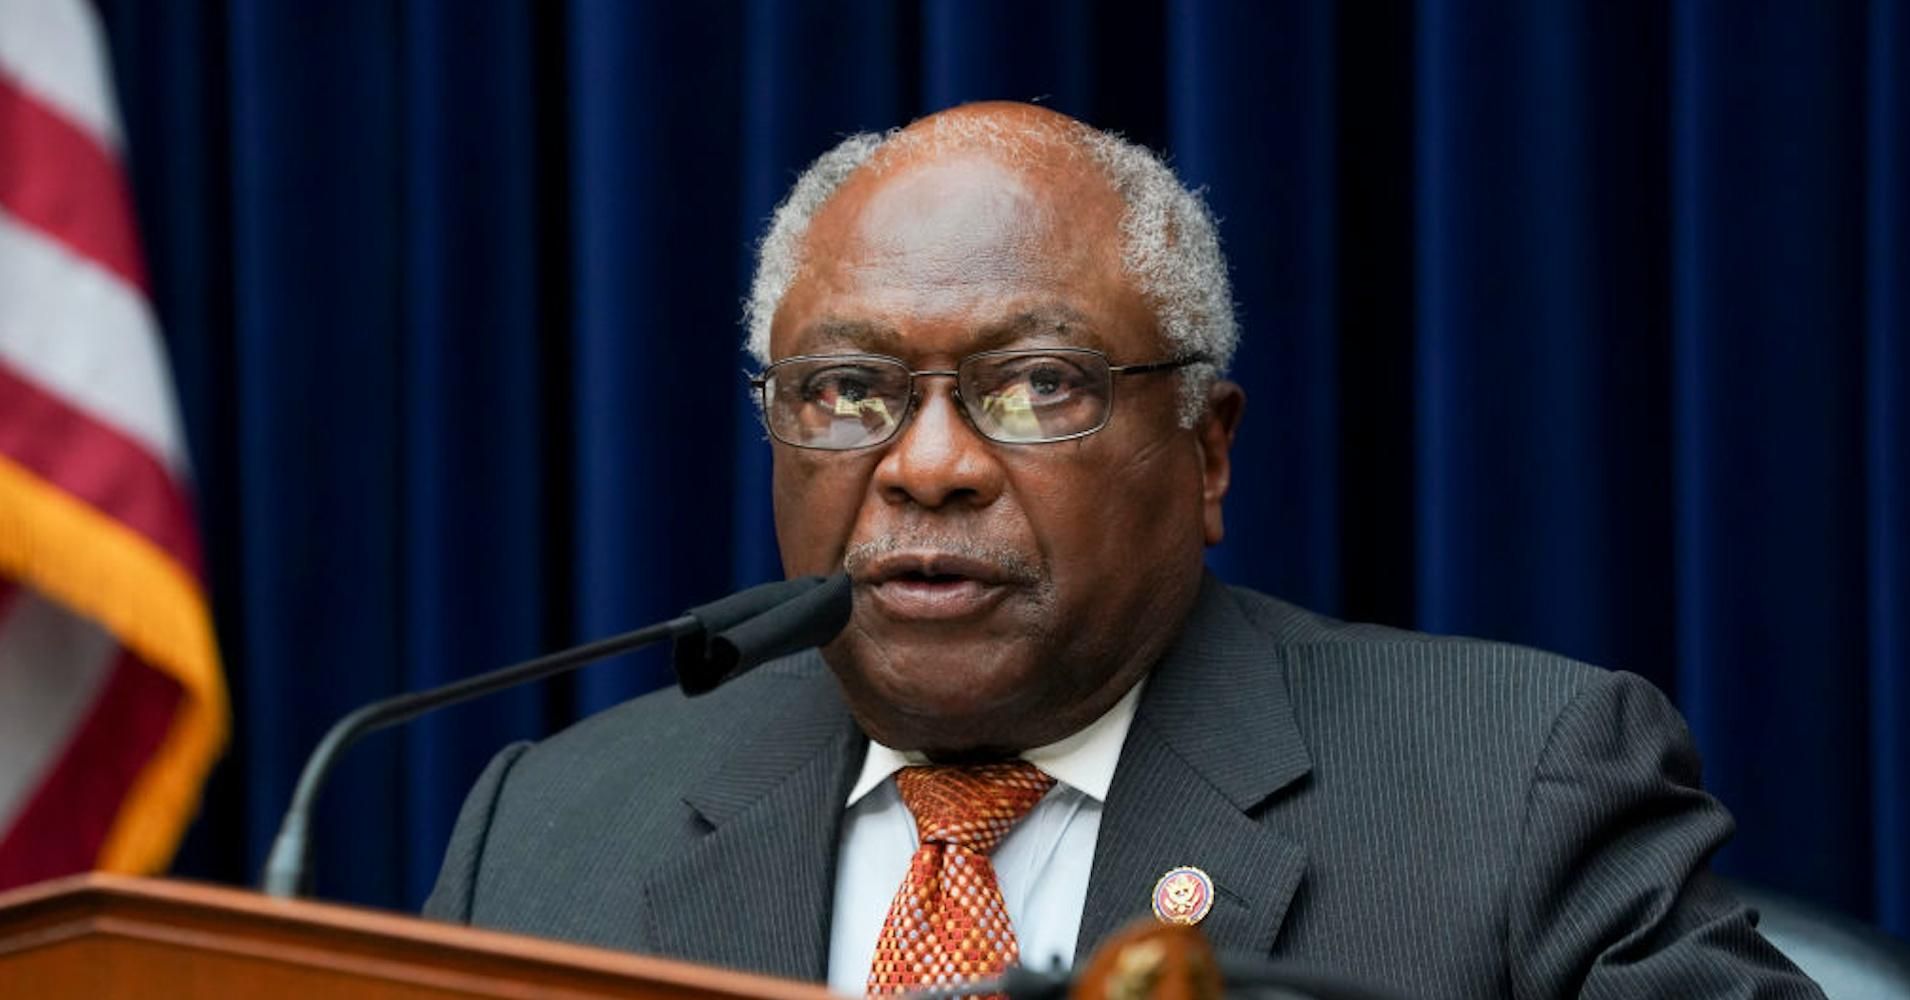 House Majority Whip James Clyburn (D-SC), chairman of the House Select Subcommittee on the Coronavirus Crisis, speaks during a hearing on September 23, 2020 in Washington, DC. Powell yesterday said the U.S. economy has a long way to go before fully recovering from the coronavirus pandemic and will need further support. (Photo by Stefani Reynolds-Pool/Getty Images)